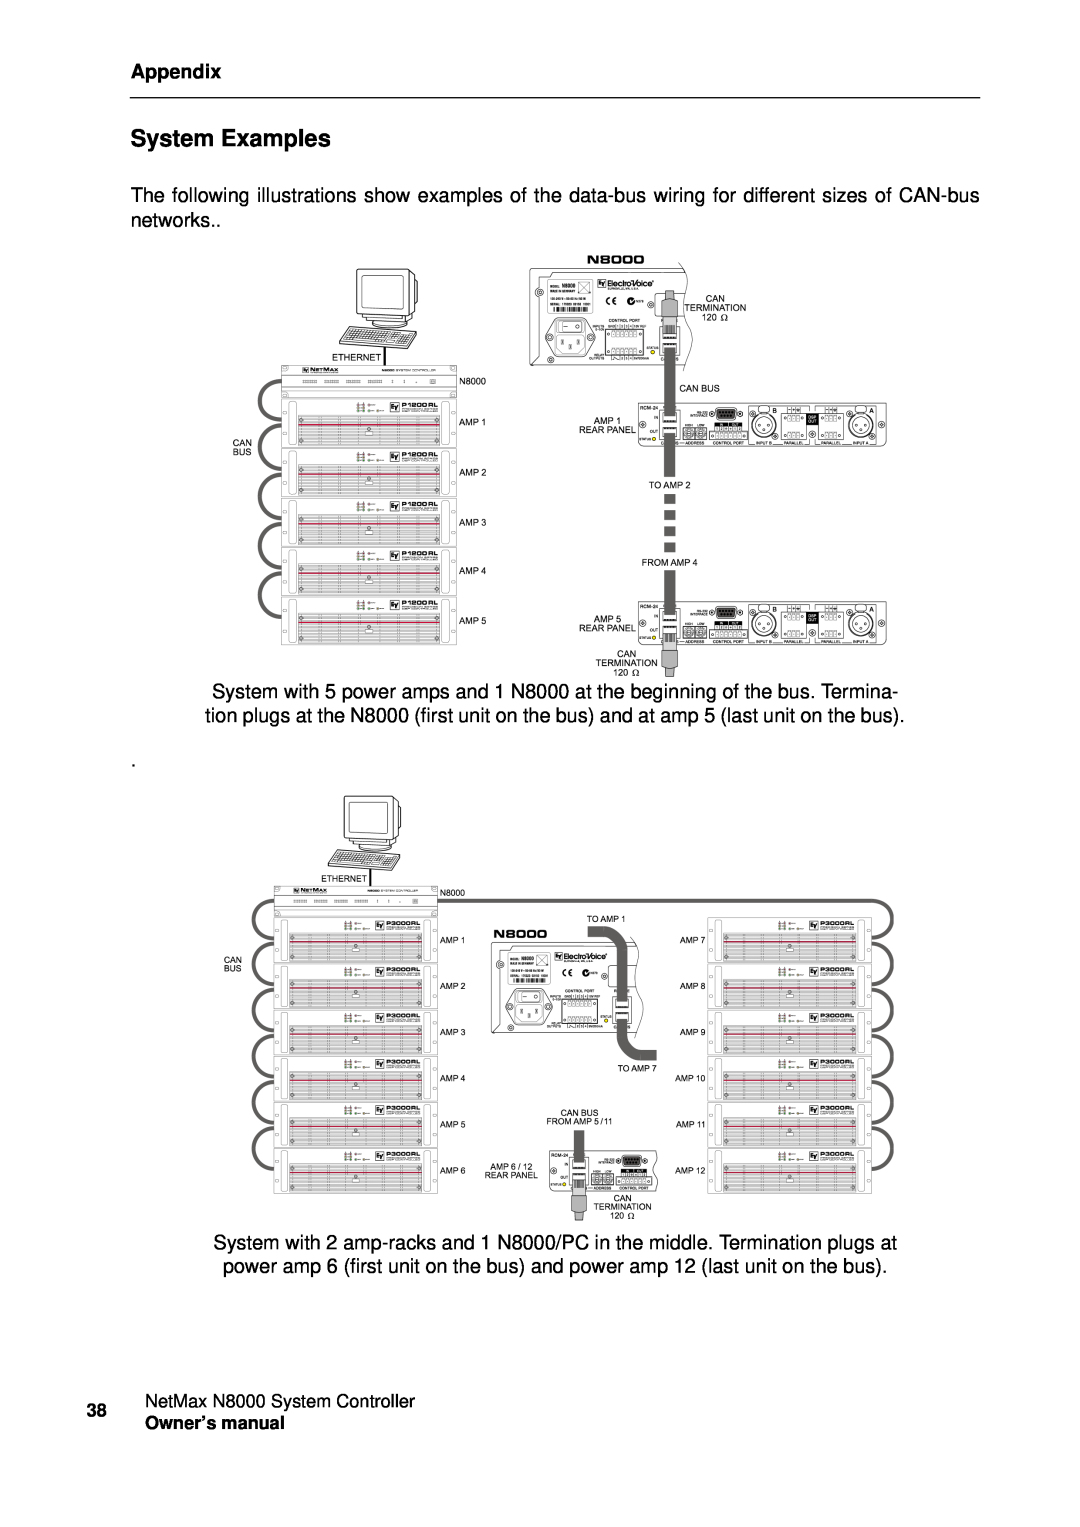 Electro-Voice owner manual System Examples, Appendix, 38NetMax N8000 System Controller 